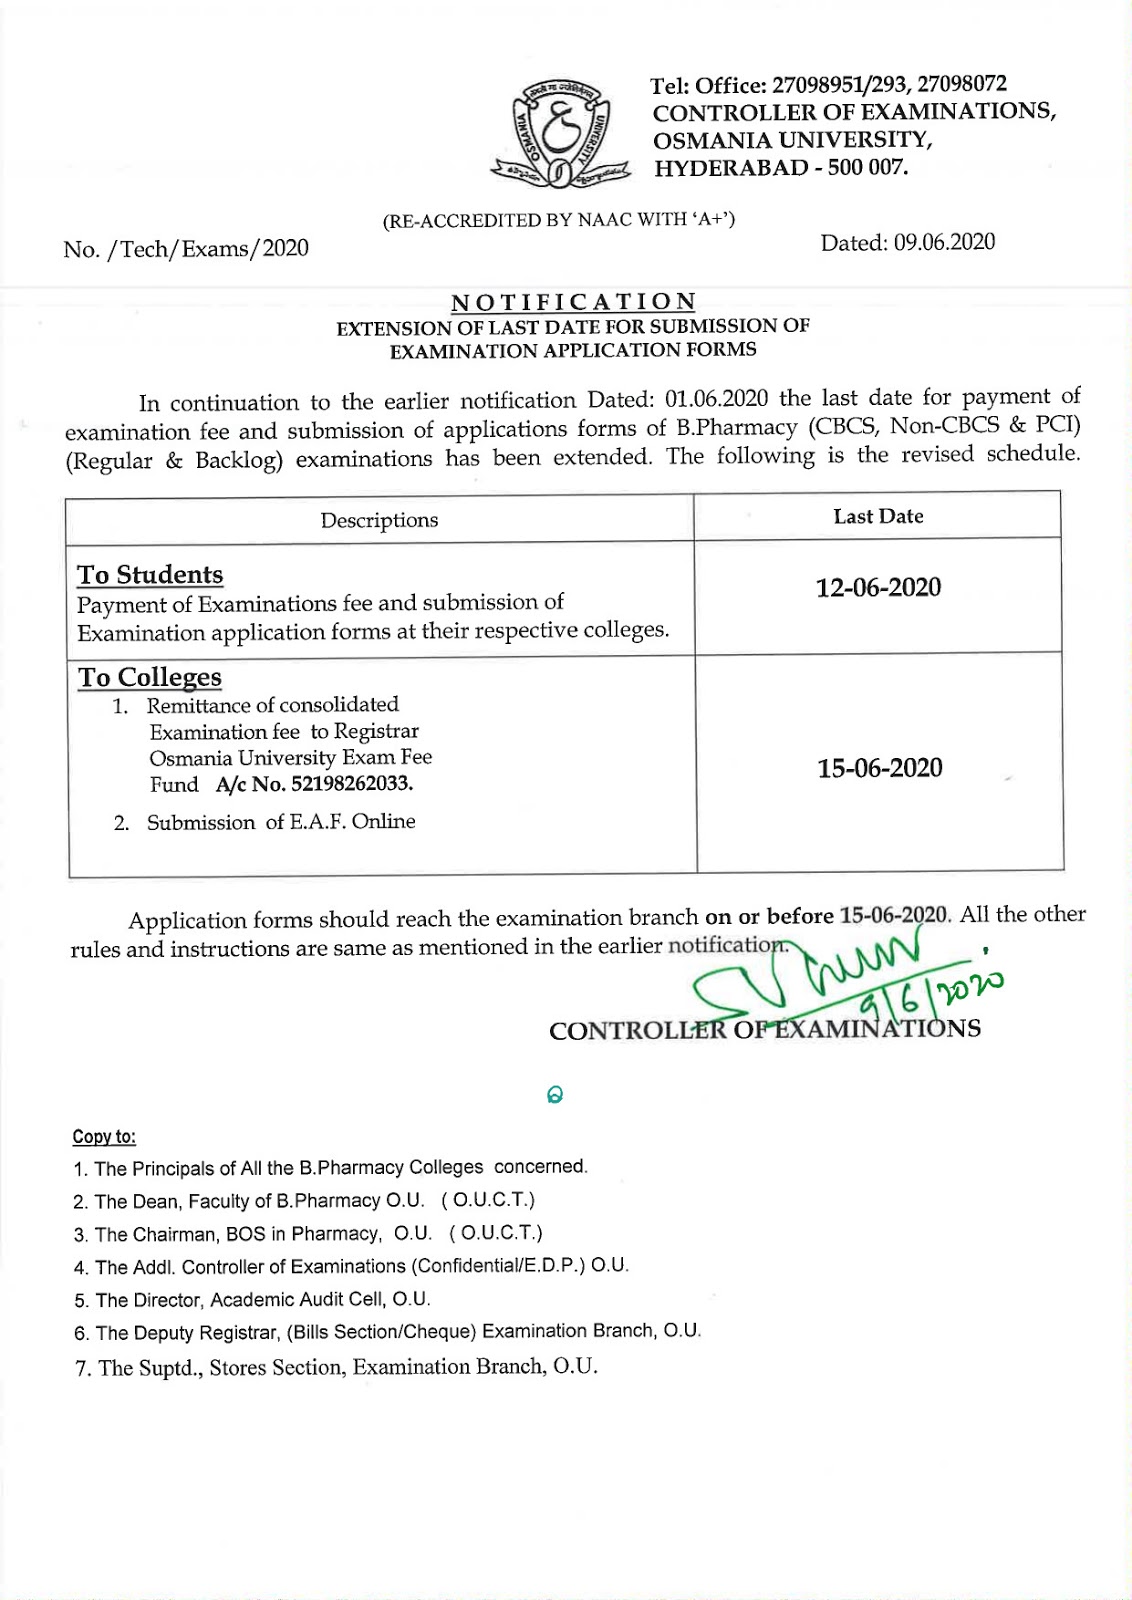 ou b.pharm cbcs, non-cbcs reg & supply june 2020 apply submission extended date notice